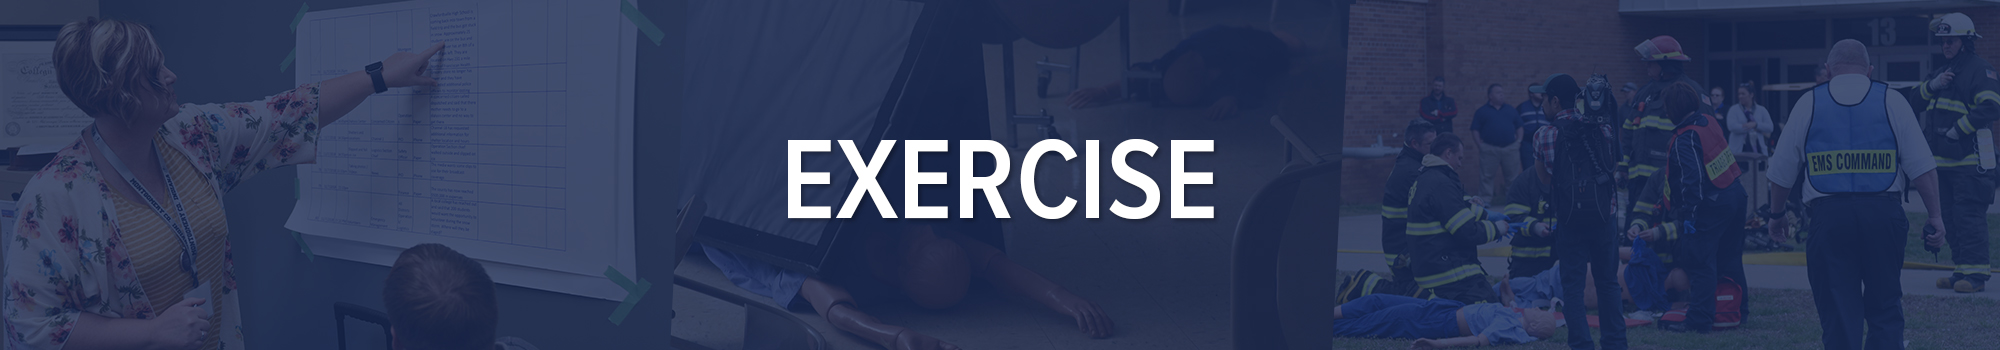 exercise banner